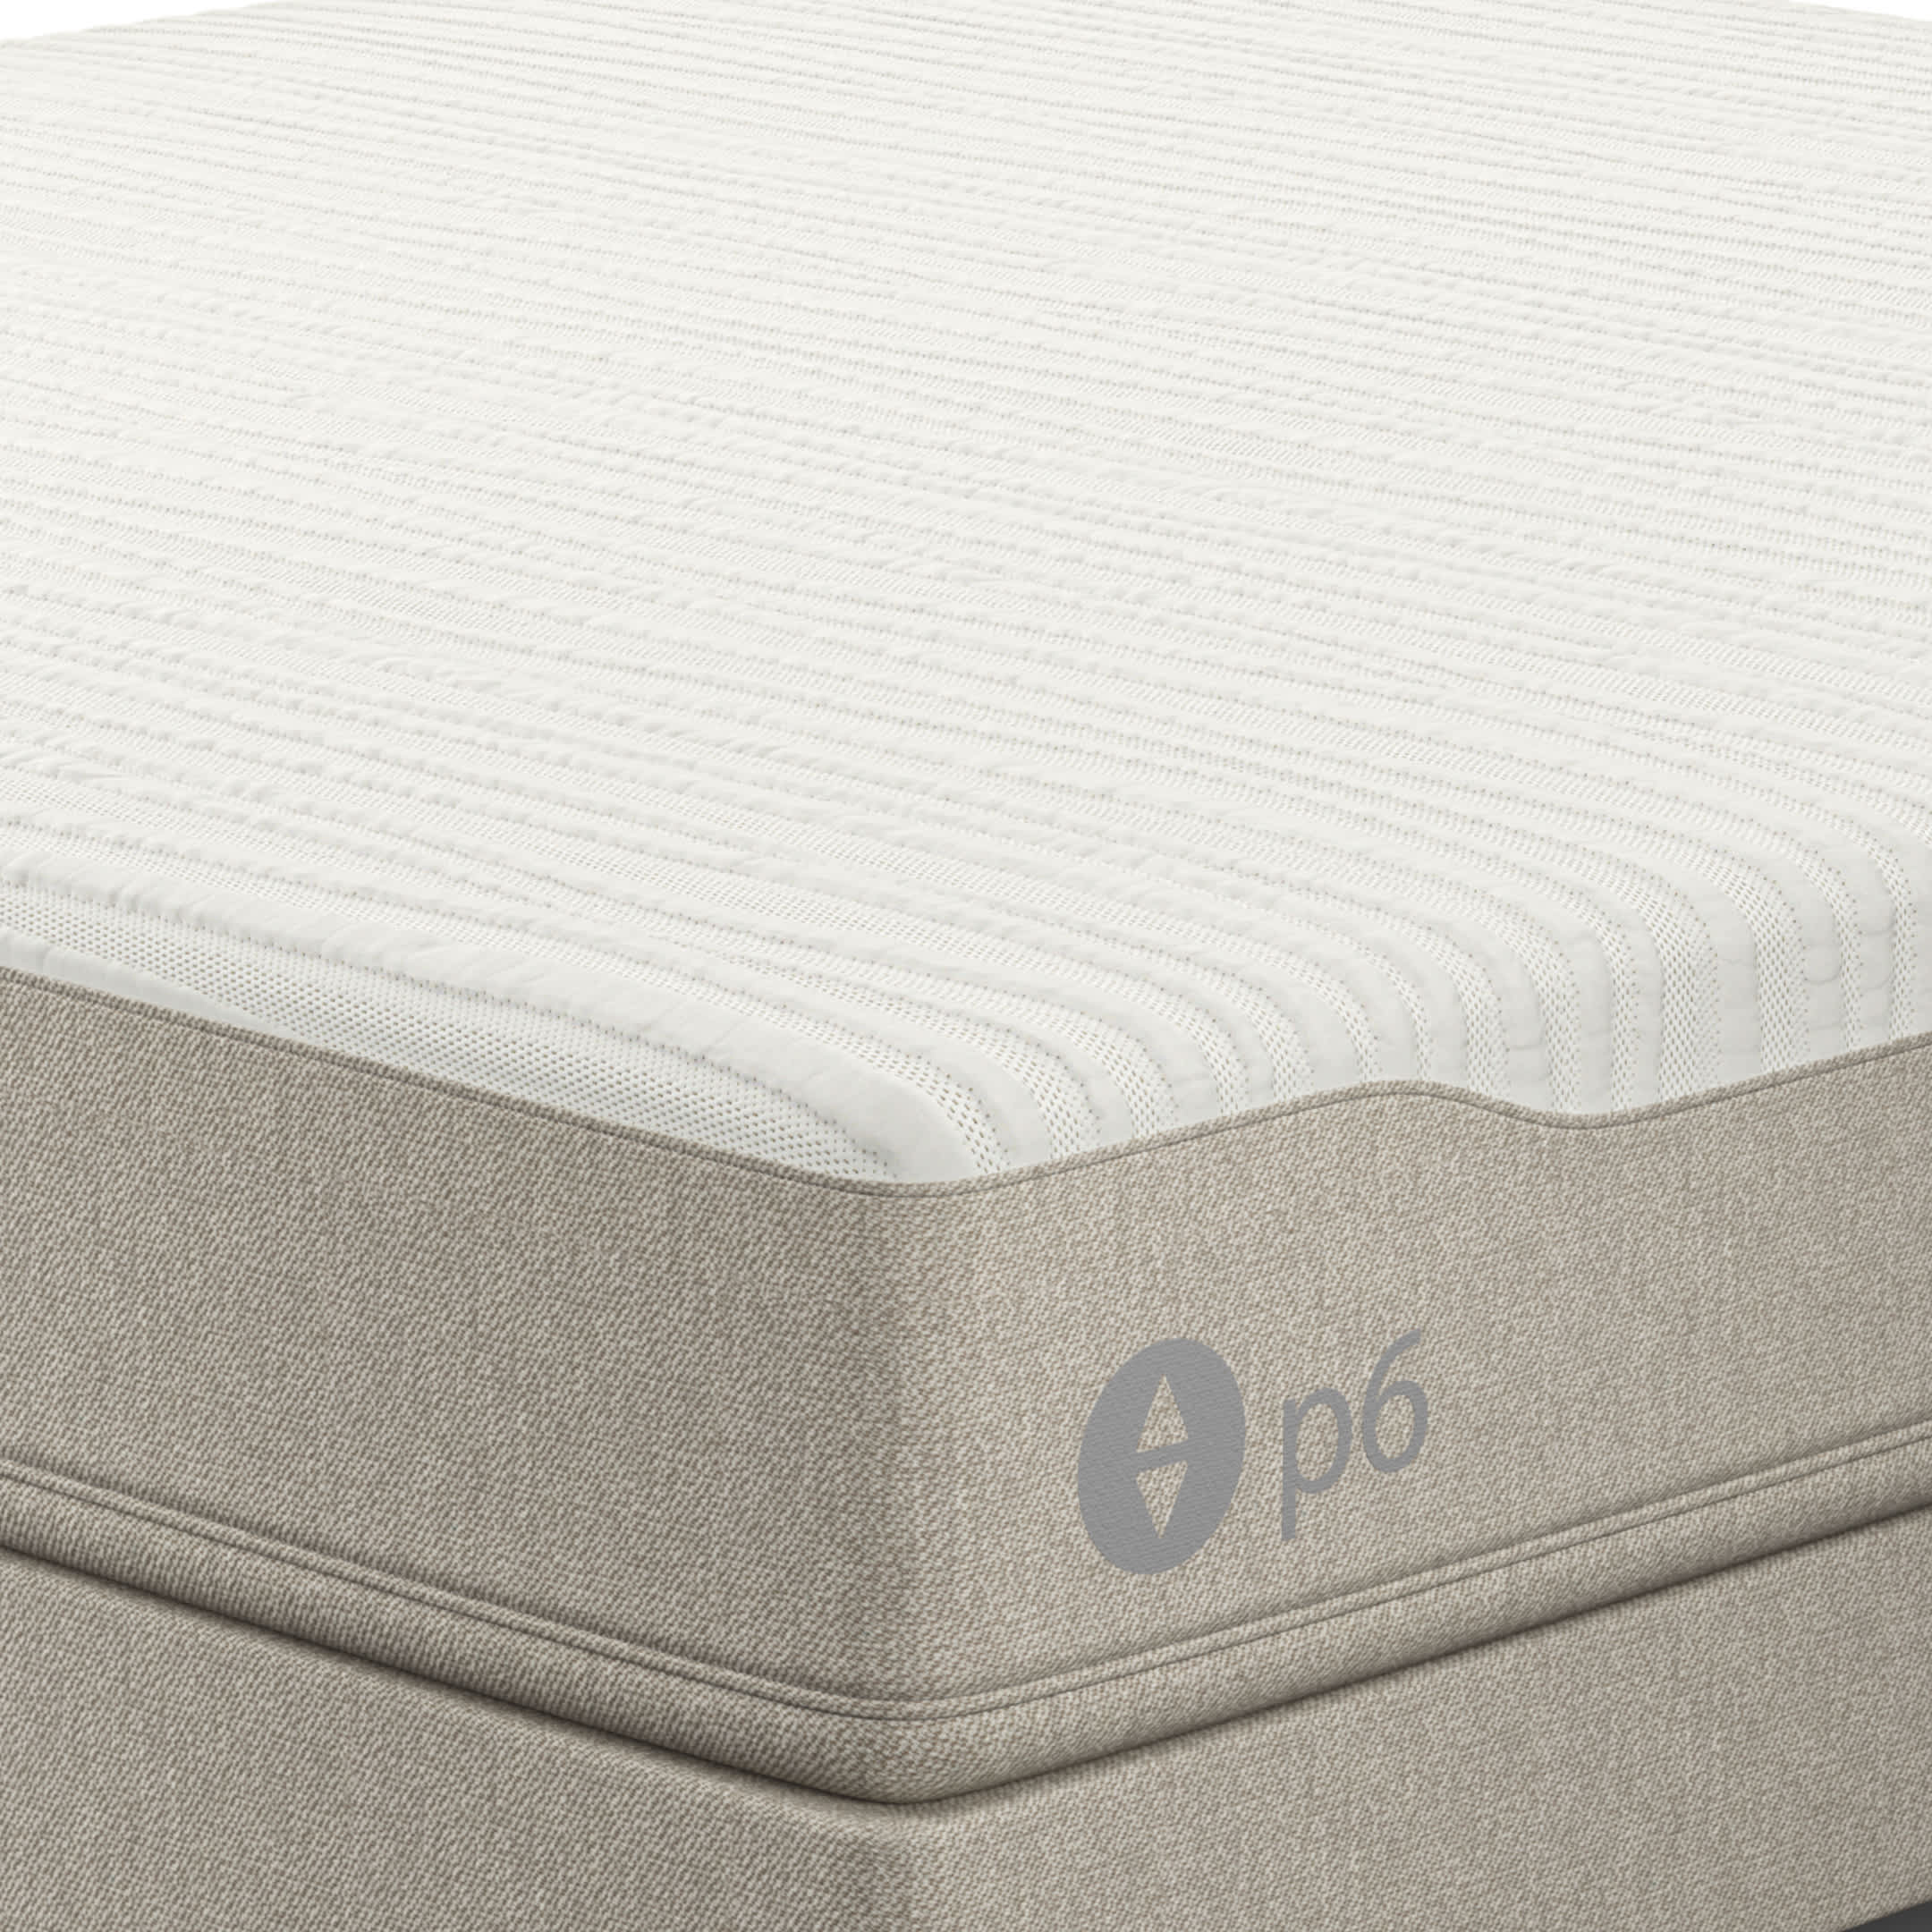 P6 360 Smart Bed Sleep Number, Sleep Number 360 Smart Bed Twin Size